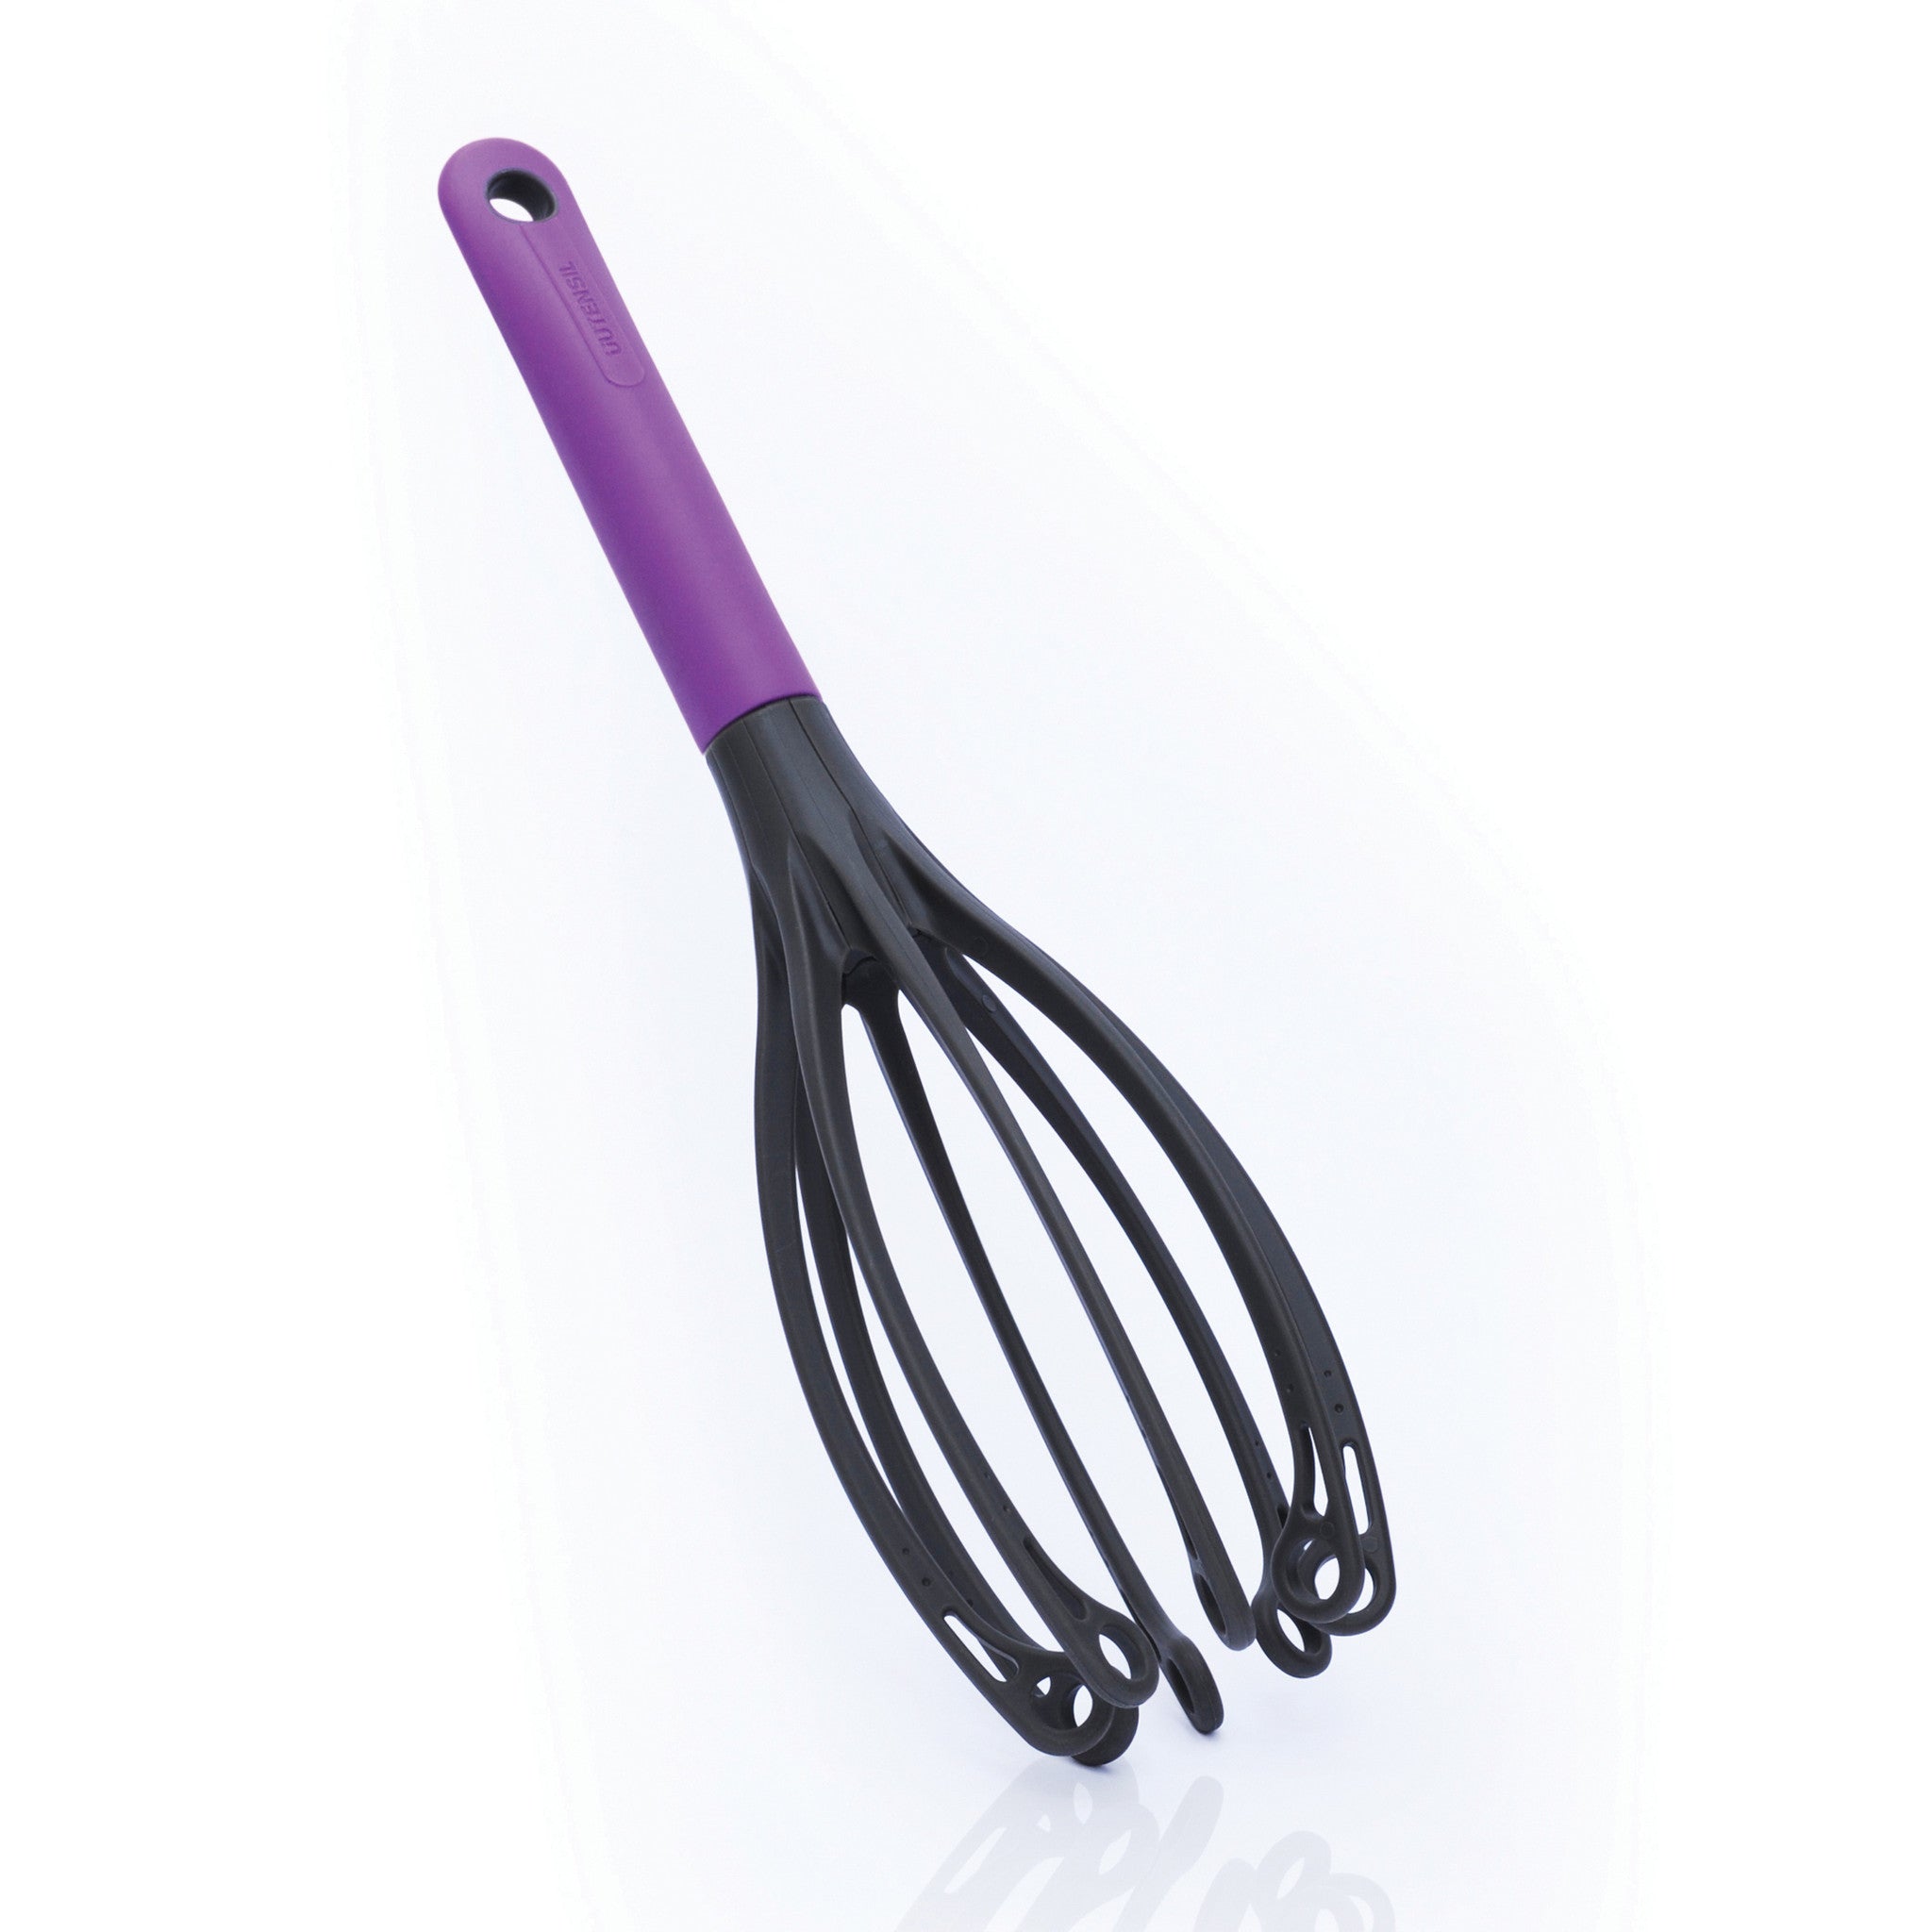 Squisk - Innovative Whisk - Innovative and Exciting Kitchen